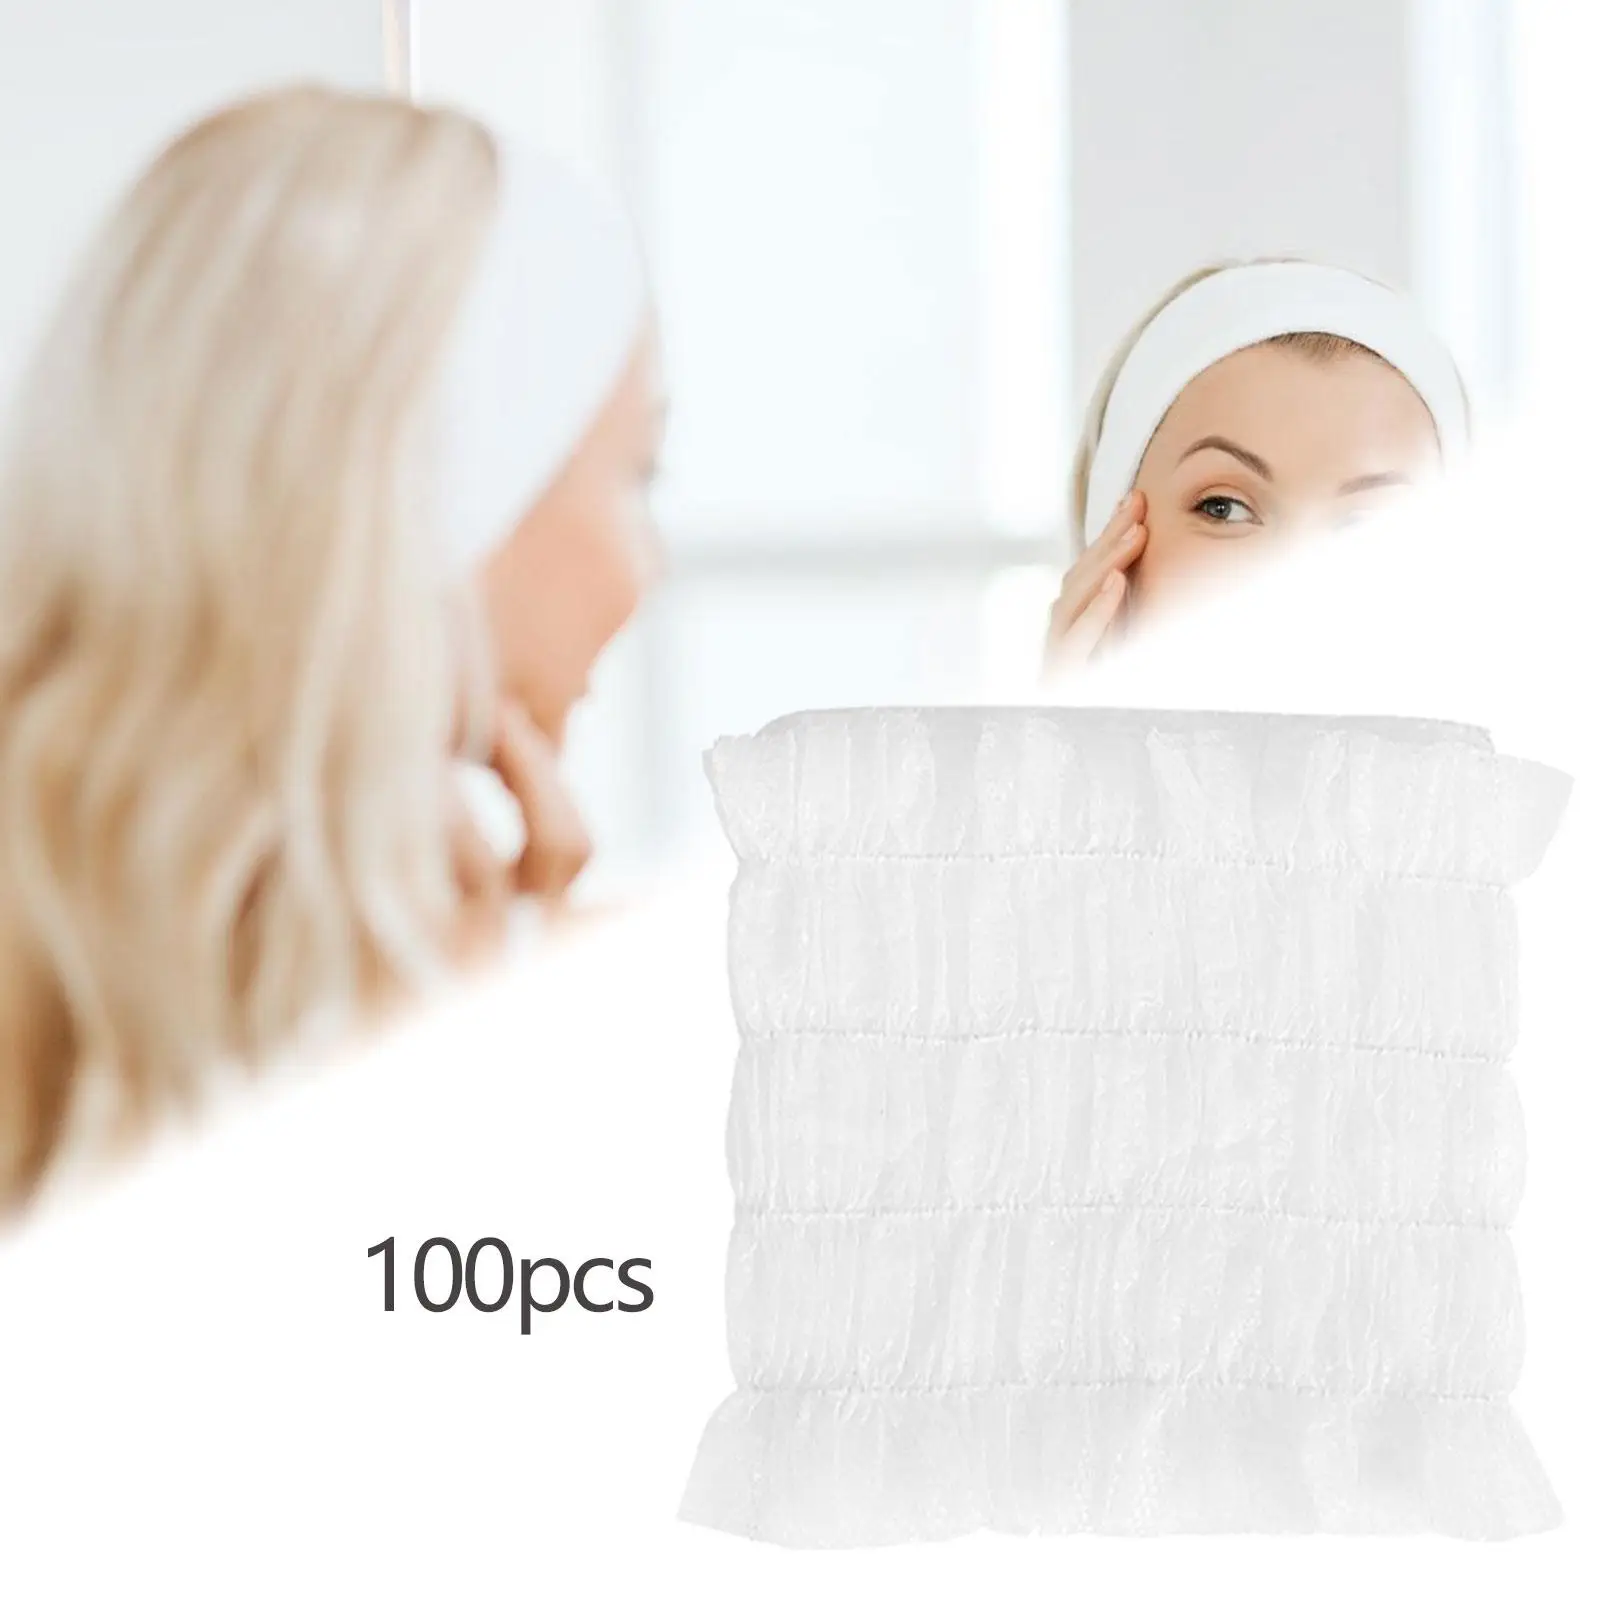 100Pcs Hair Tie Facial Beauty Supply Towels for Face Beauty Headbands Hair Hoop for Hospital Makeup Bath Shower Skincare Party